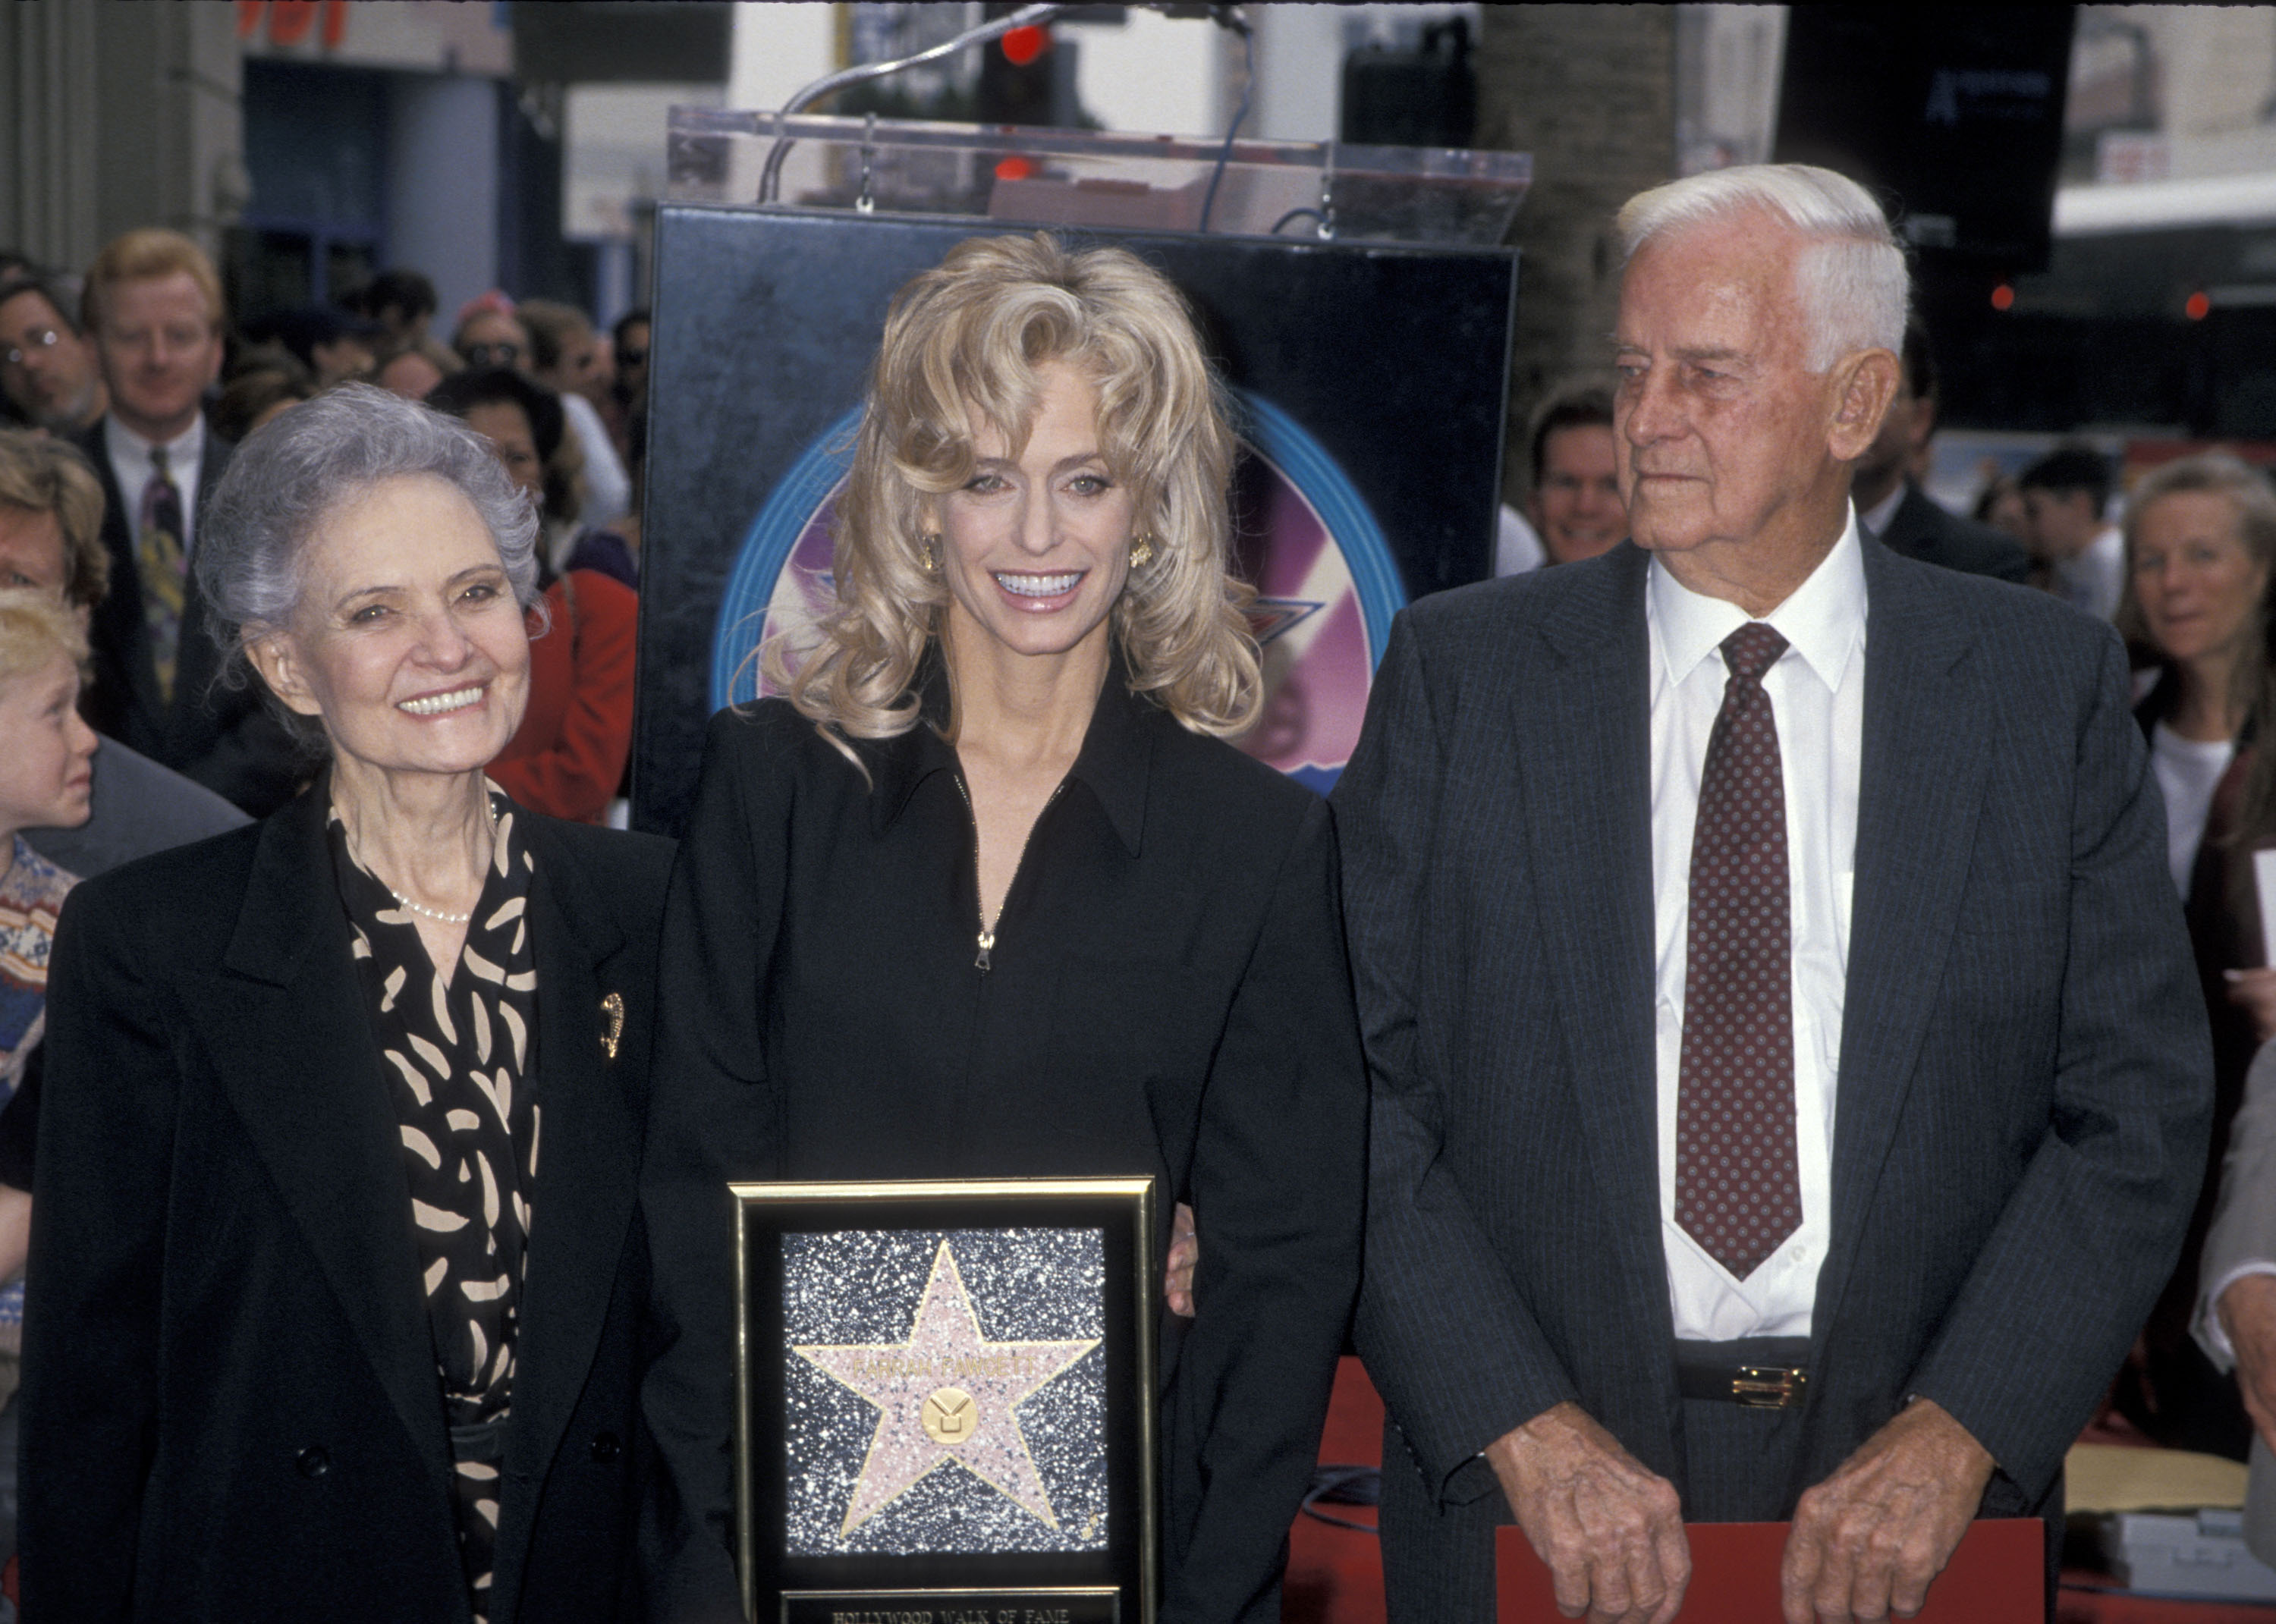 Farrah Fawcett with her parents, Pauline and James Fawcett as she's honored with a Star on the Hollywood Walk of Fame on February 23, 1995 | Source: Getty Images